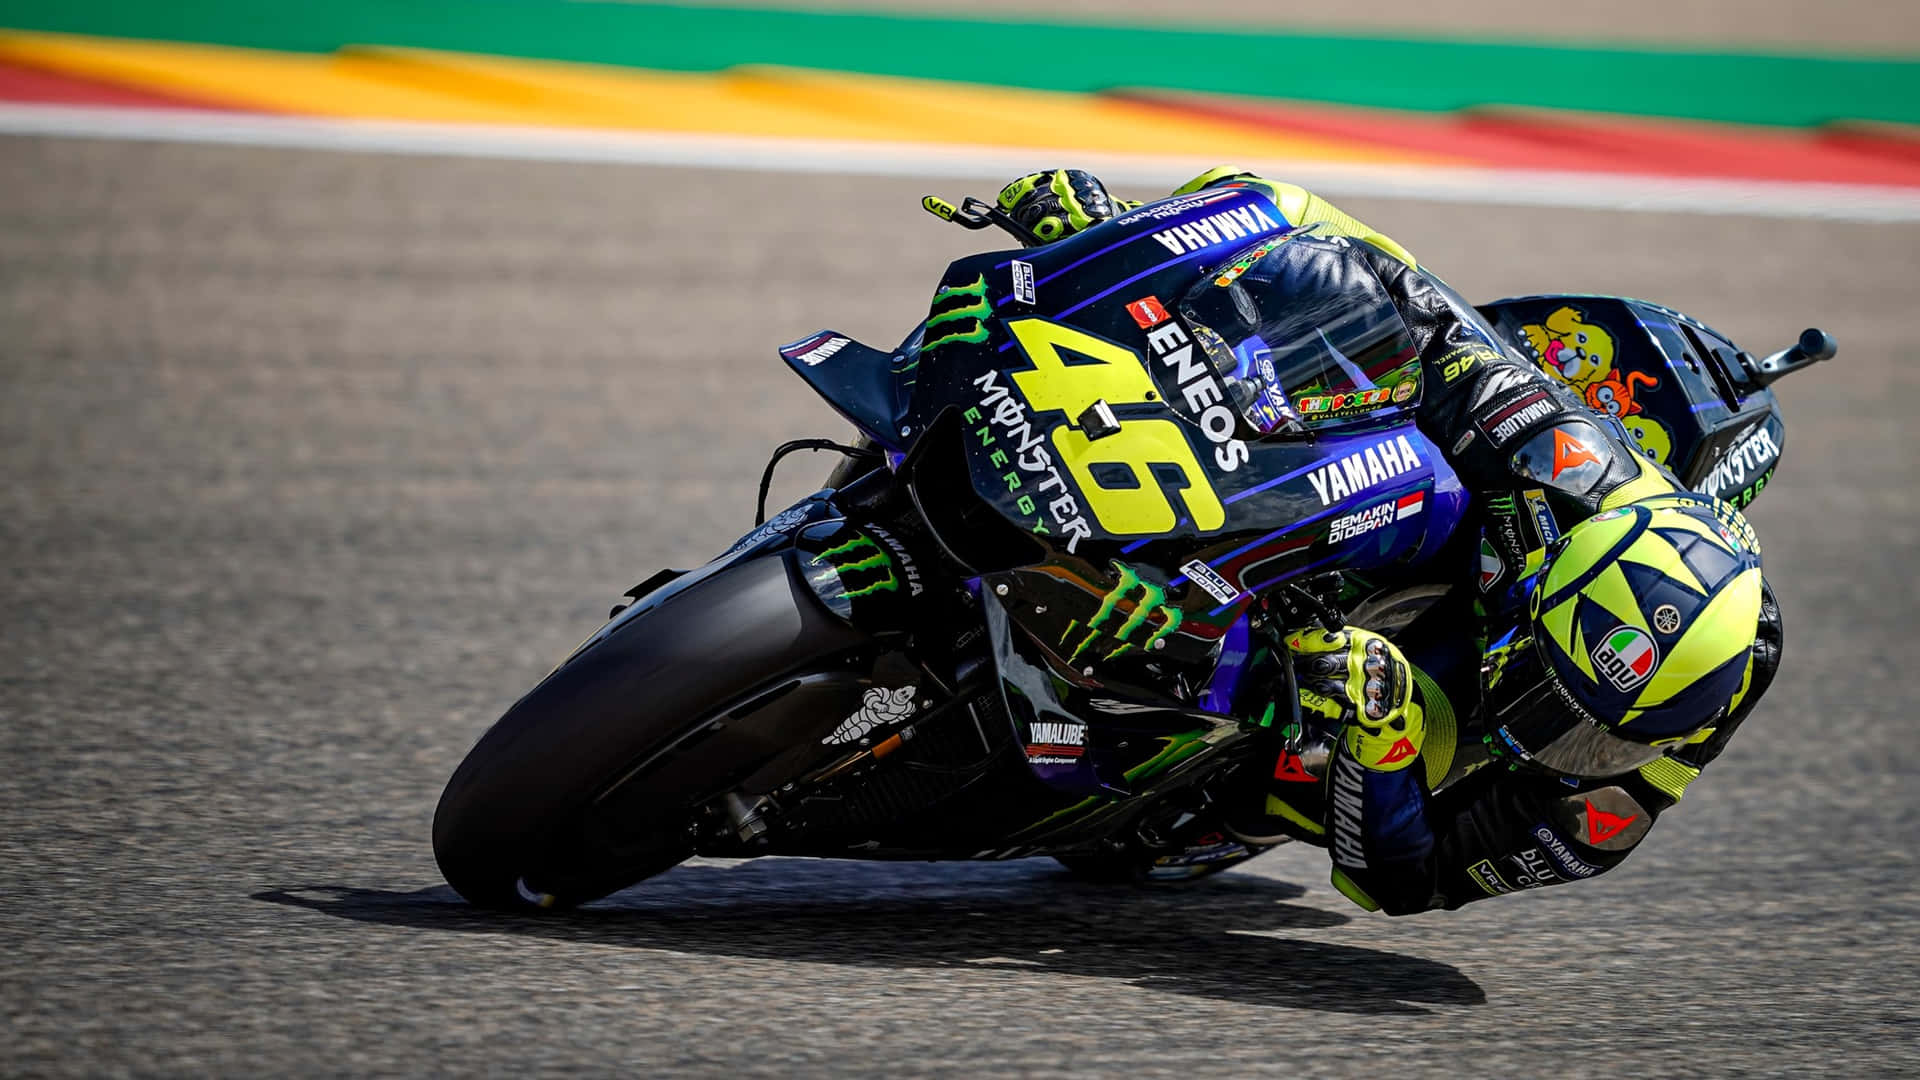 Motogp 4K wallpapers for your desktop or mobile screen free and easy to  download